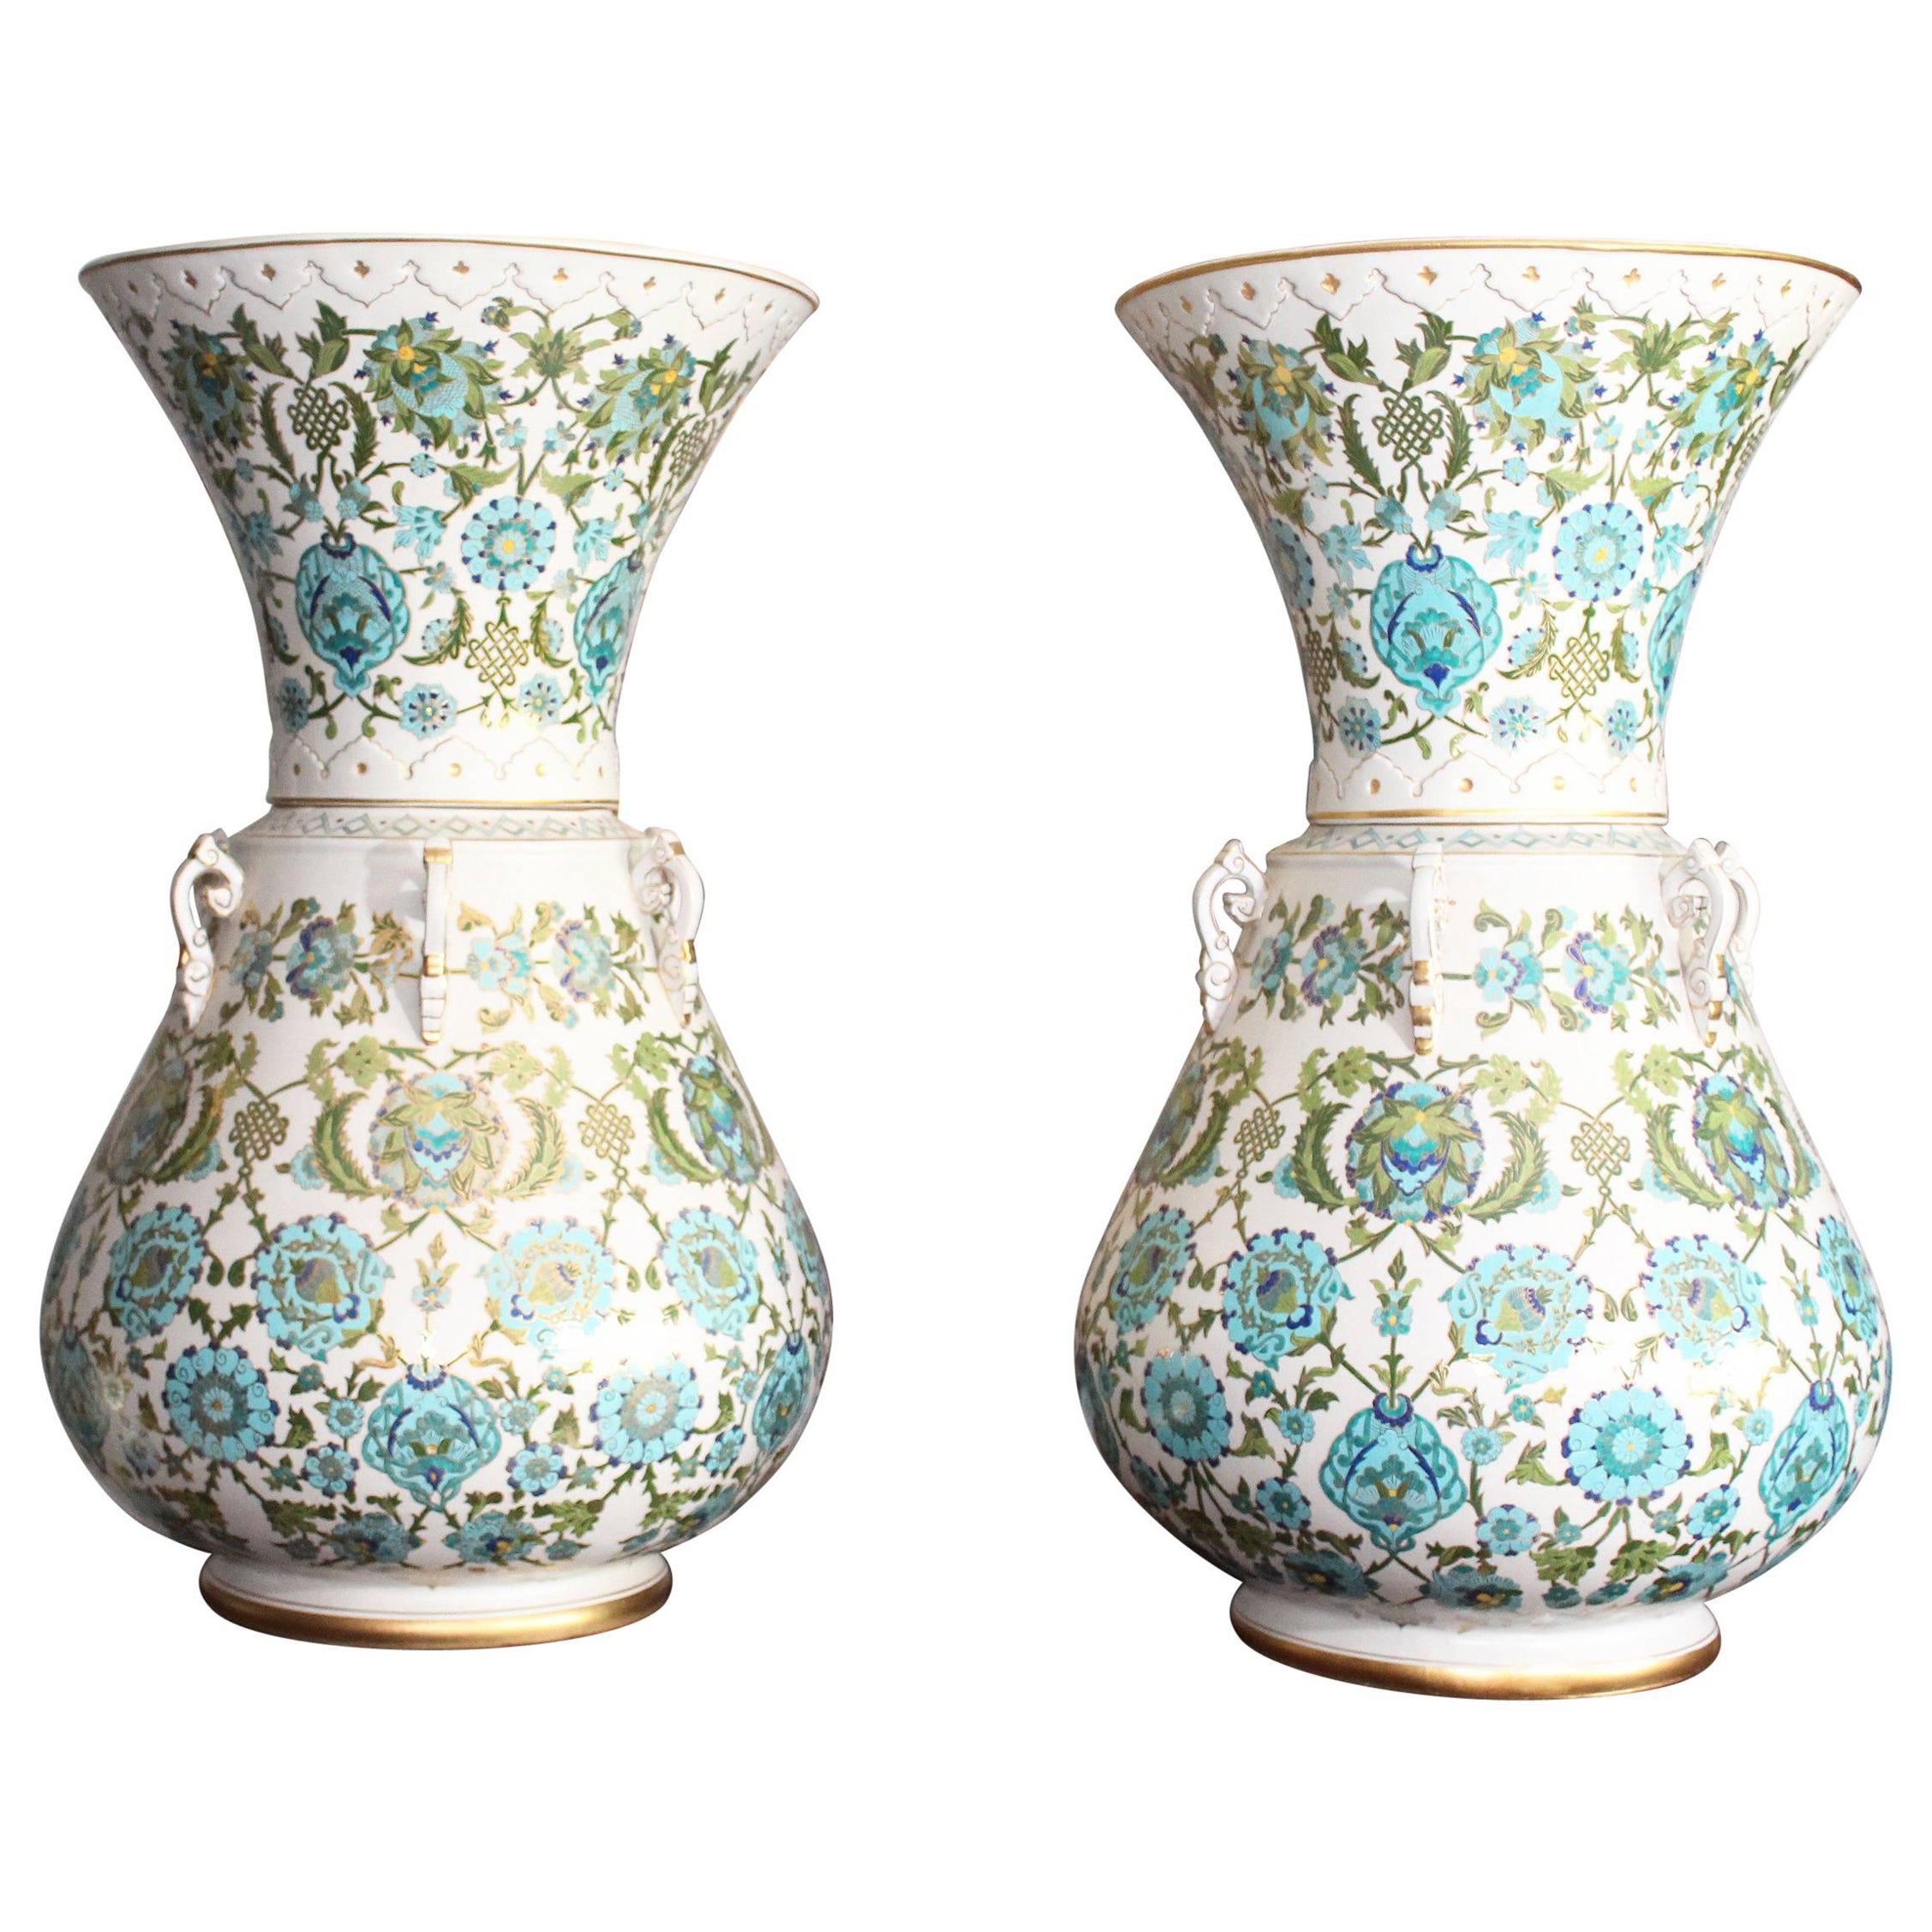 Pair of Mosque Porcelain Lamps with Gilded and Enameled Floral Patterns For Sale